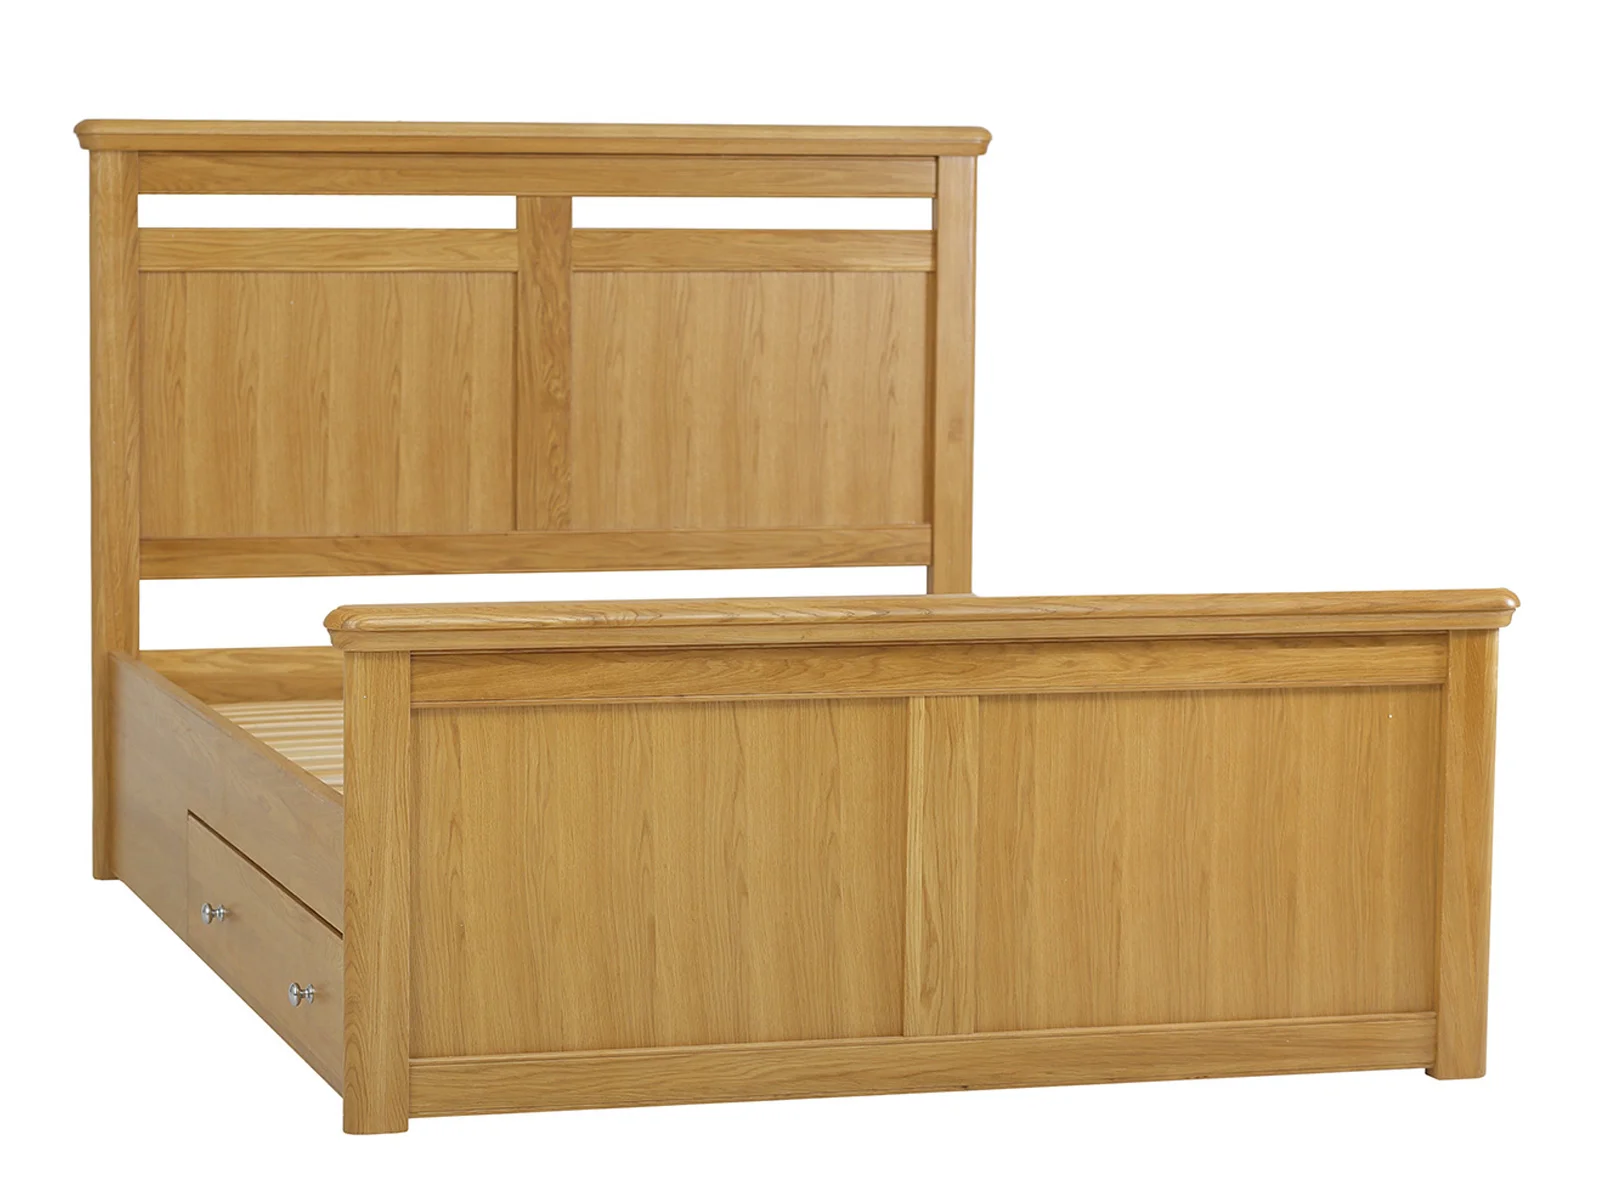 Double Storage Bed Frame